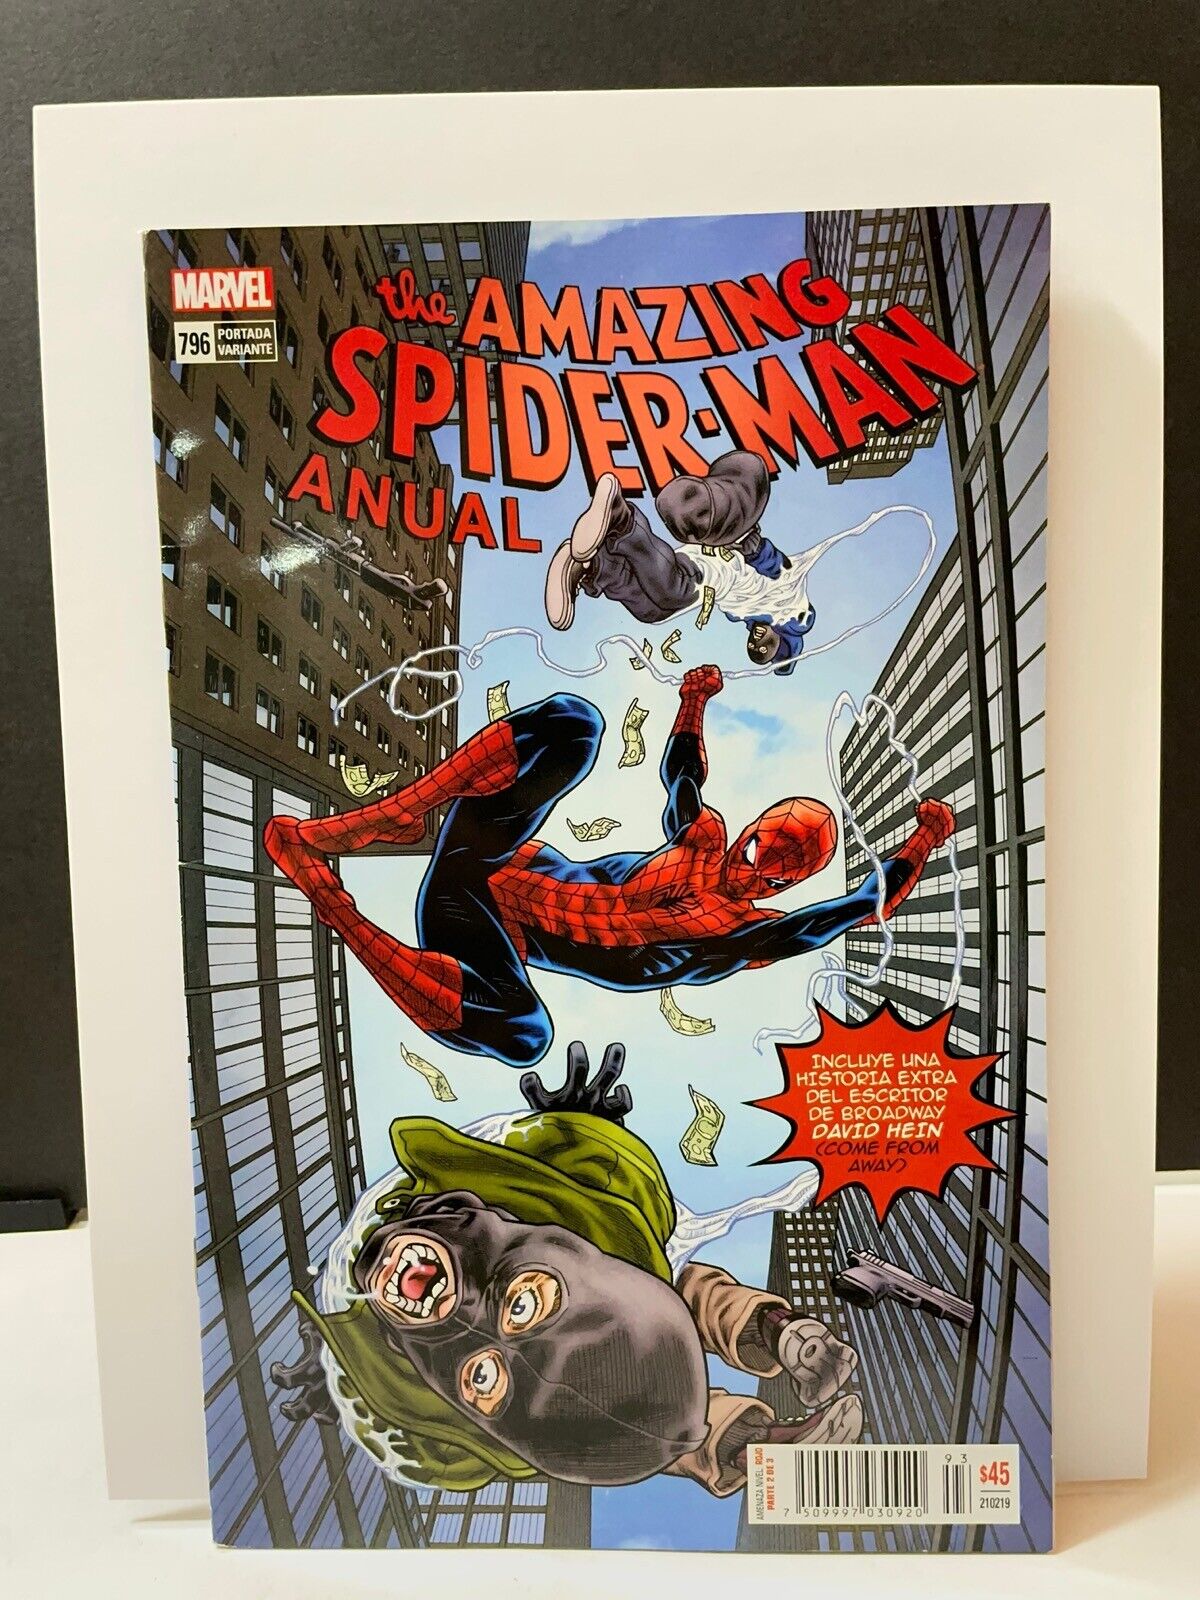 The Amazing Spider-Man #796 (ASM Annual #42 Variant) Televisa Mexico VG/FN Look